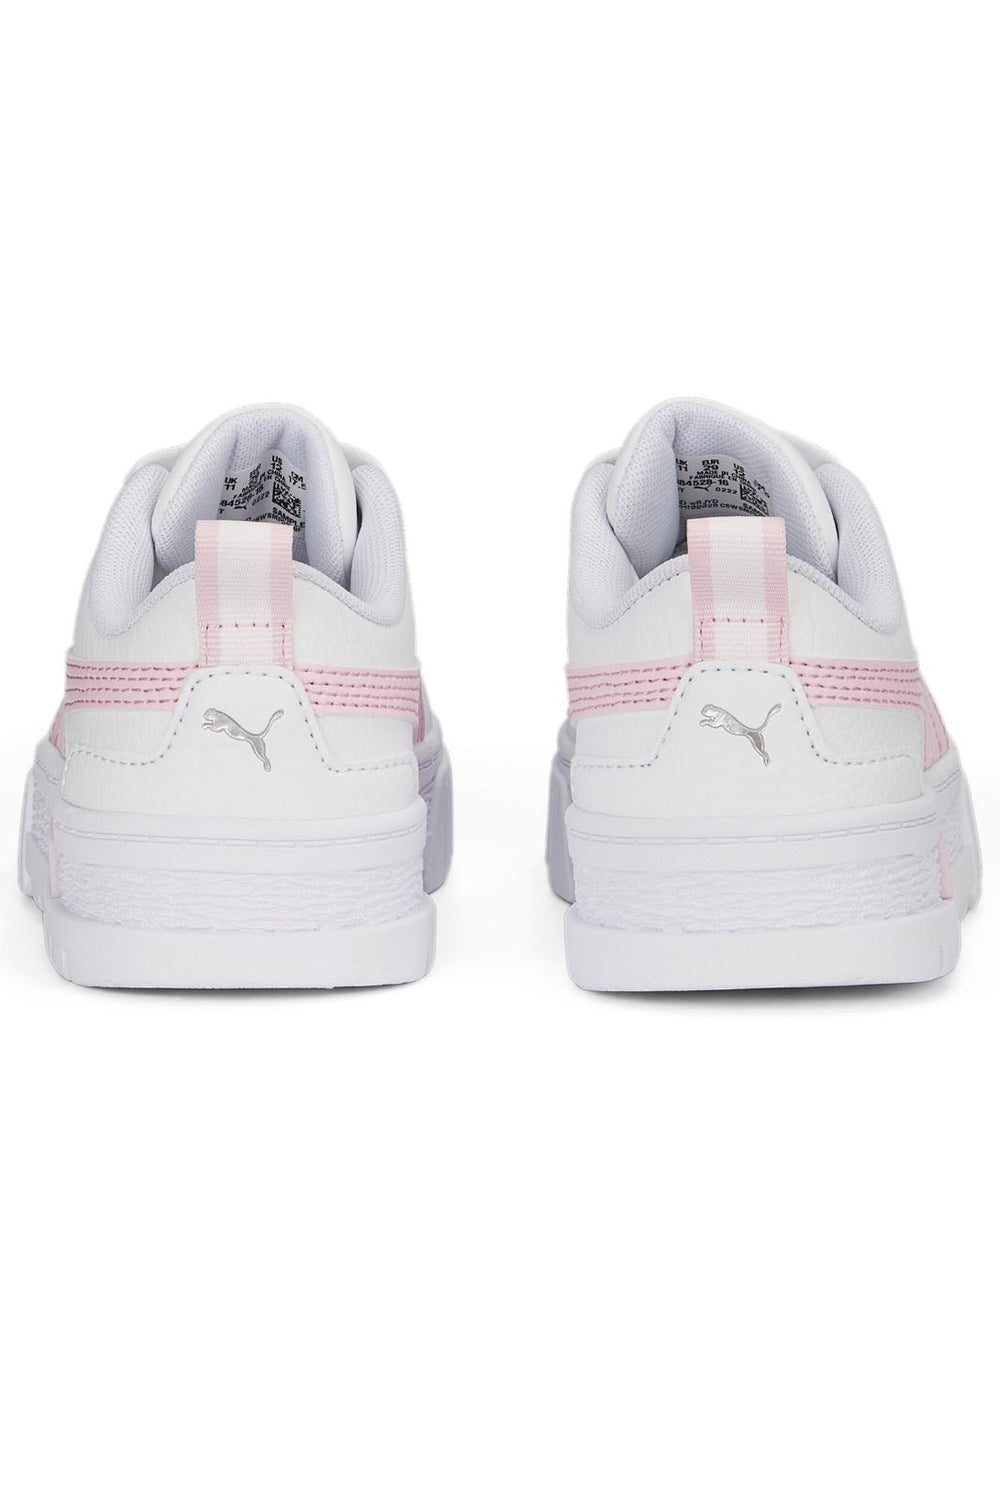 Puma - Mayze Lth PS - White Pearl Pink vivid Violet Sneakers 